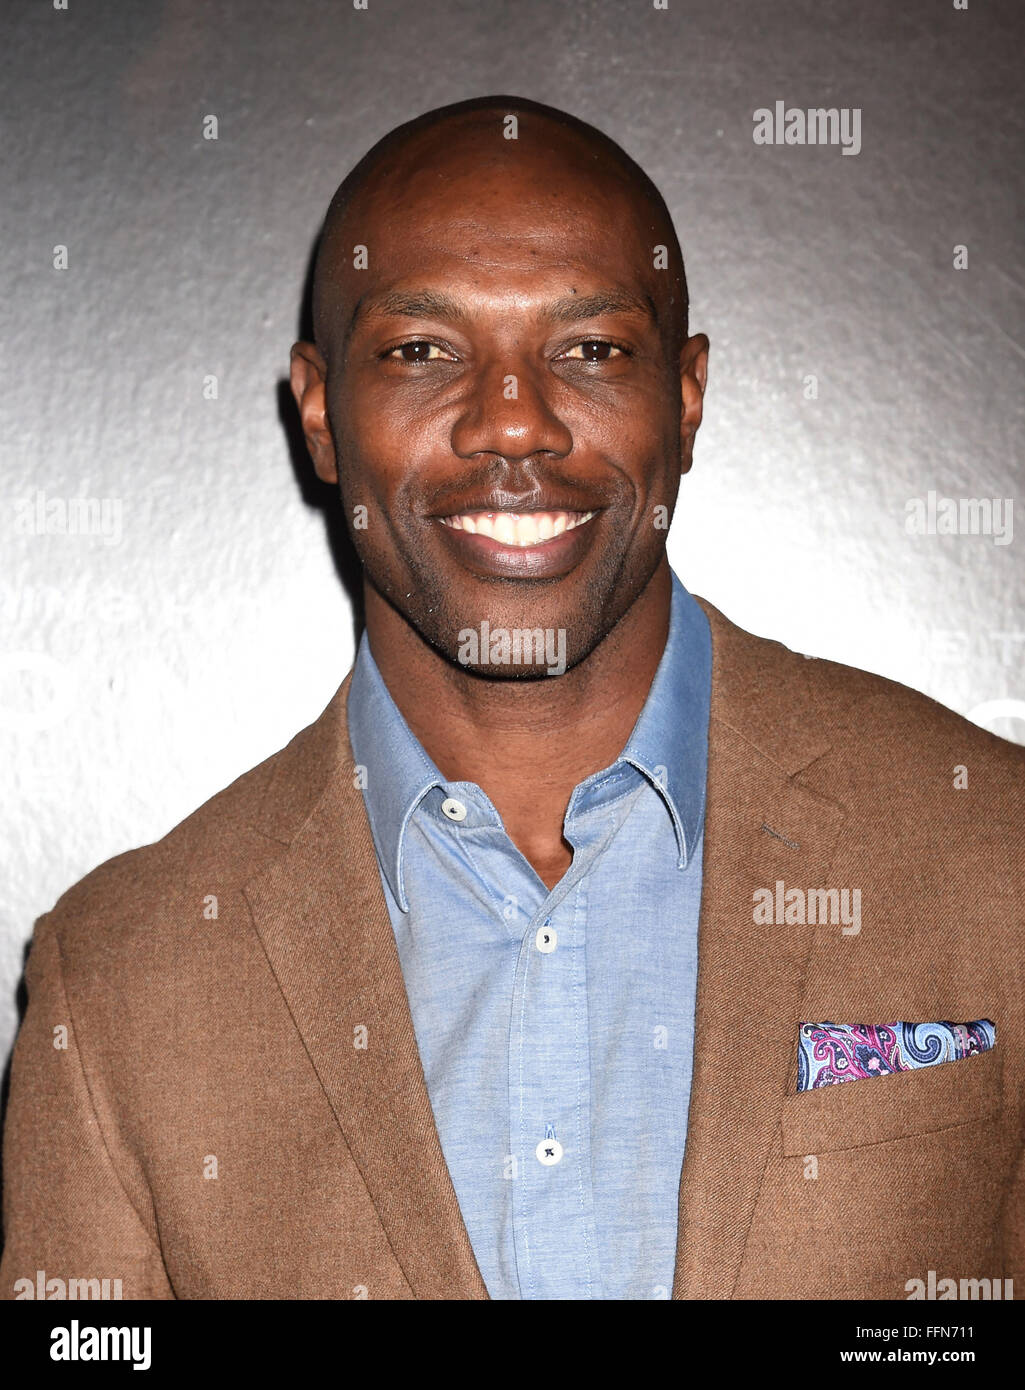 Former NFL player Terrell Owens attends the screening of Columbia Pictures' 'Concussion' at the Regency Village Theater on November 23, 2015 in Westwood, California., Stock Photo